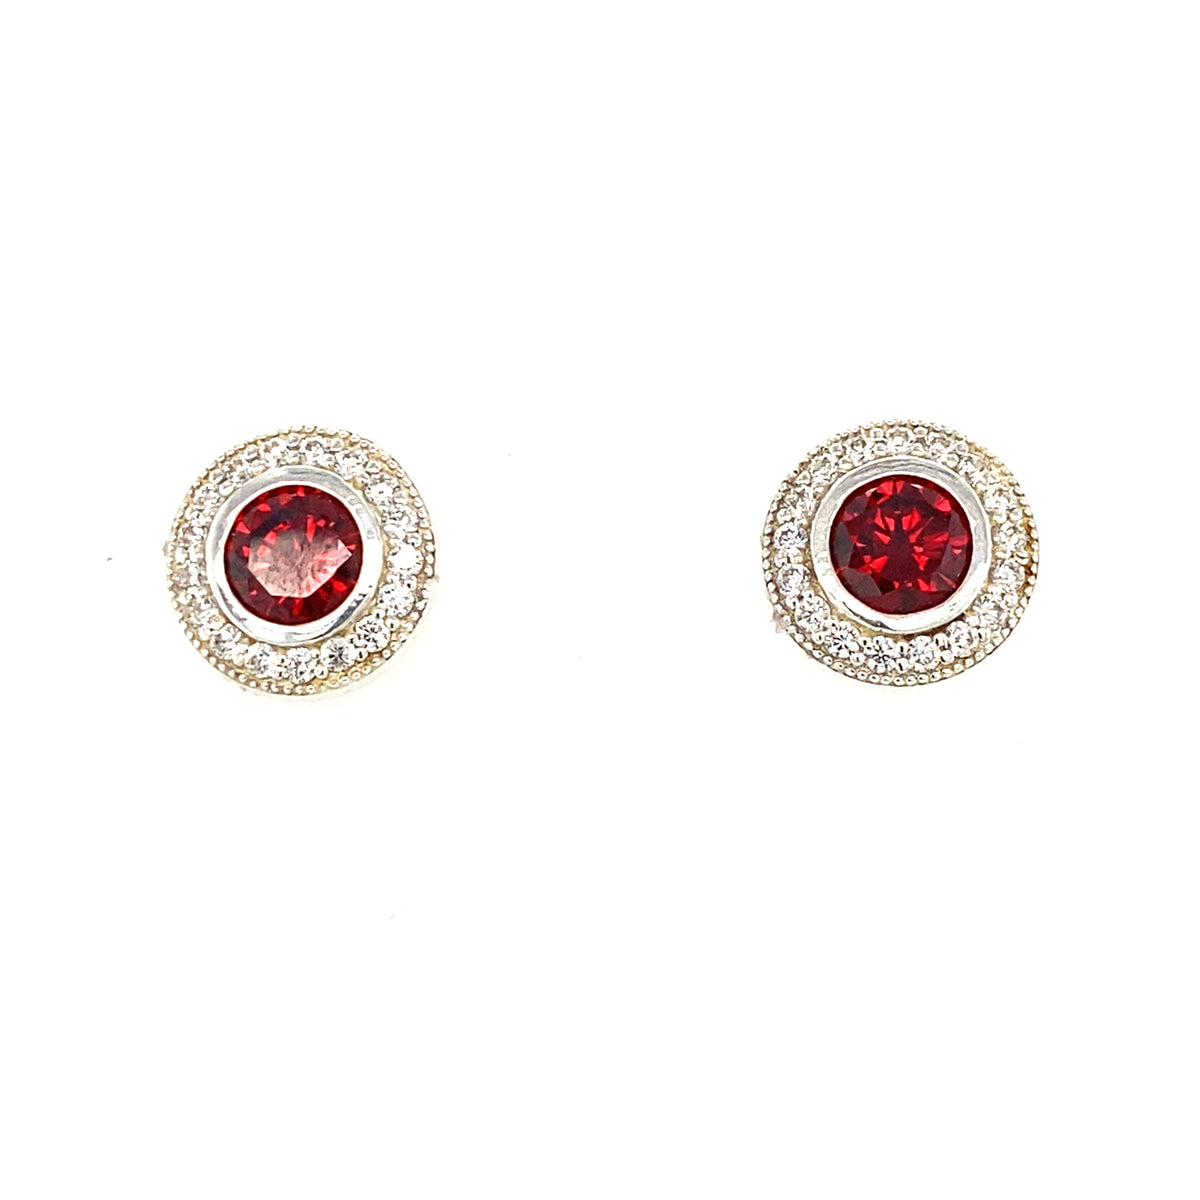 Sterling Silver Earrings with a Red Stone Centre